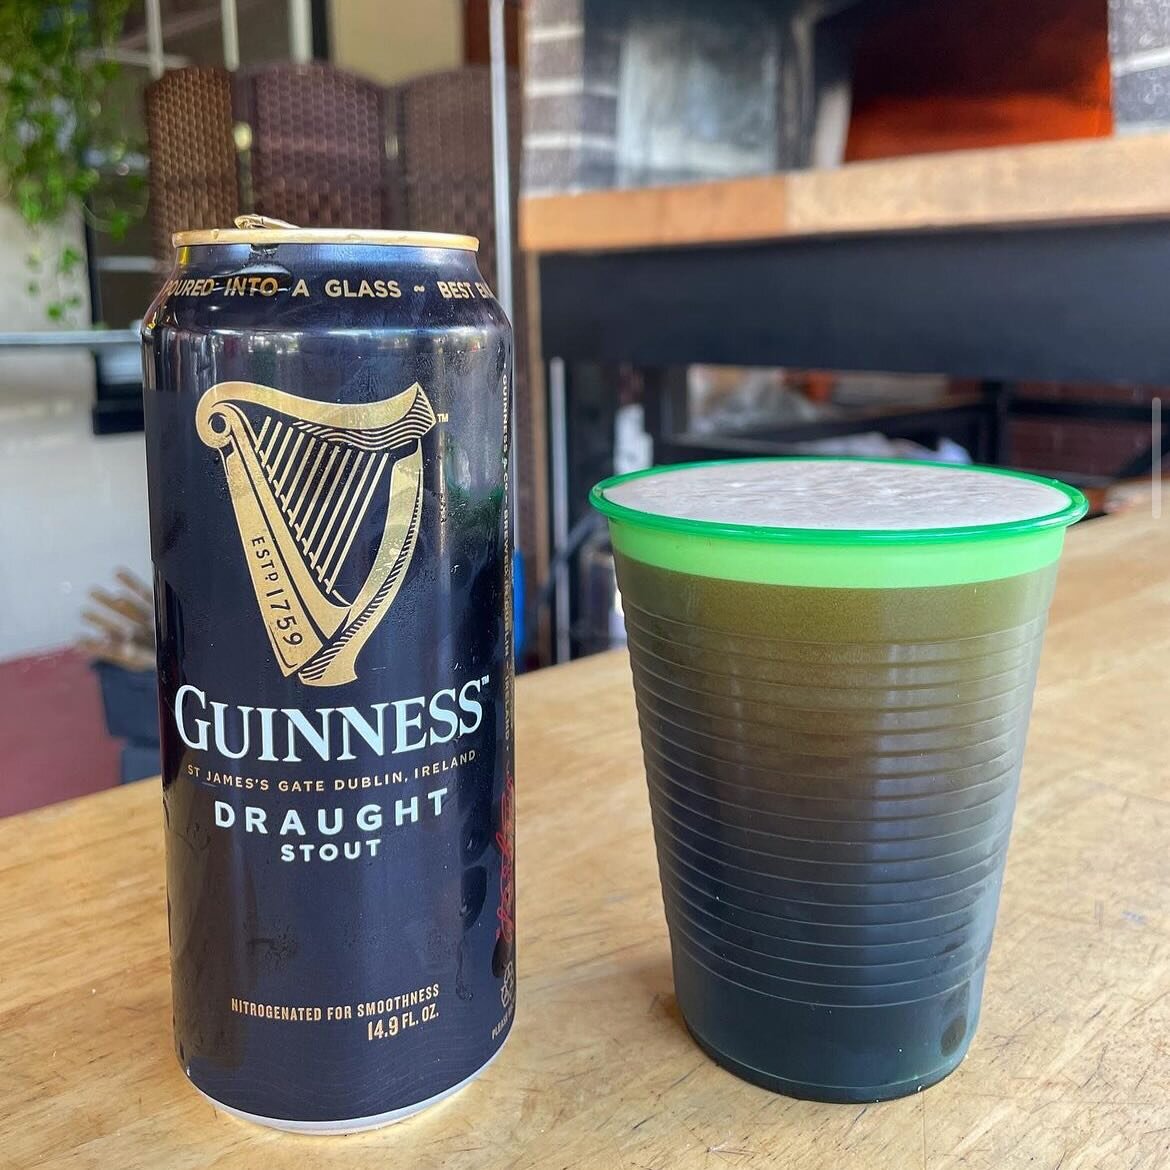 Enjoy the annual Scottish Highland Games with a Guinness Draught in your hand 🏴󠁧󠁢󠁳󠁣󠁴󠁿💪🏼

🍻 Open container and available while supplies last $7 14.9oz pour 

#shadrachsfieryfurnace #pizza #personalpies #madetoorder #custom #brickoven #family